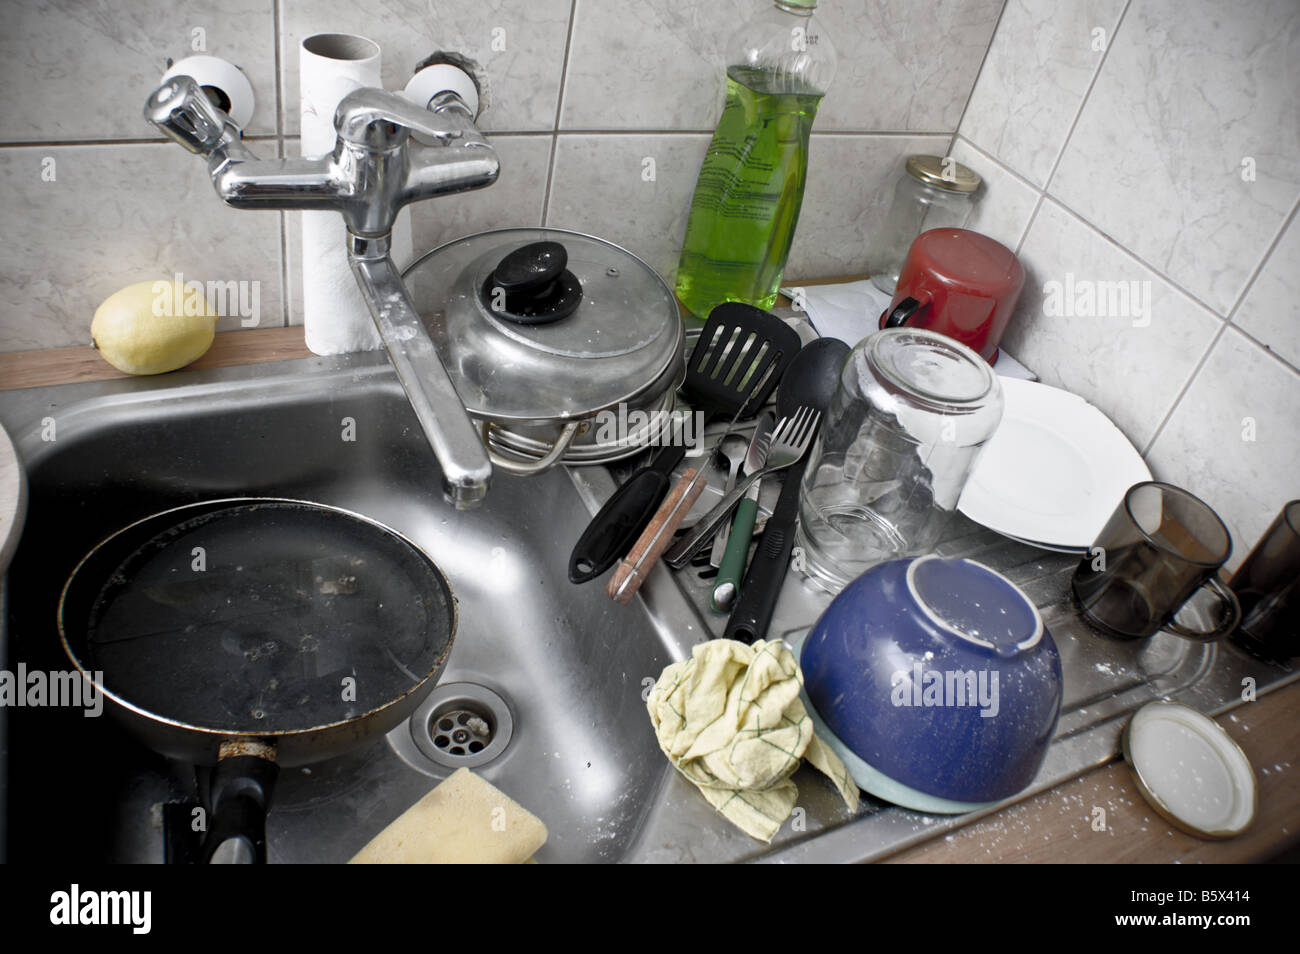 Kitchen sink full of dirty dishes Stock Photo - Alamy